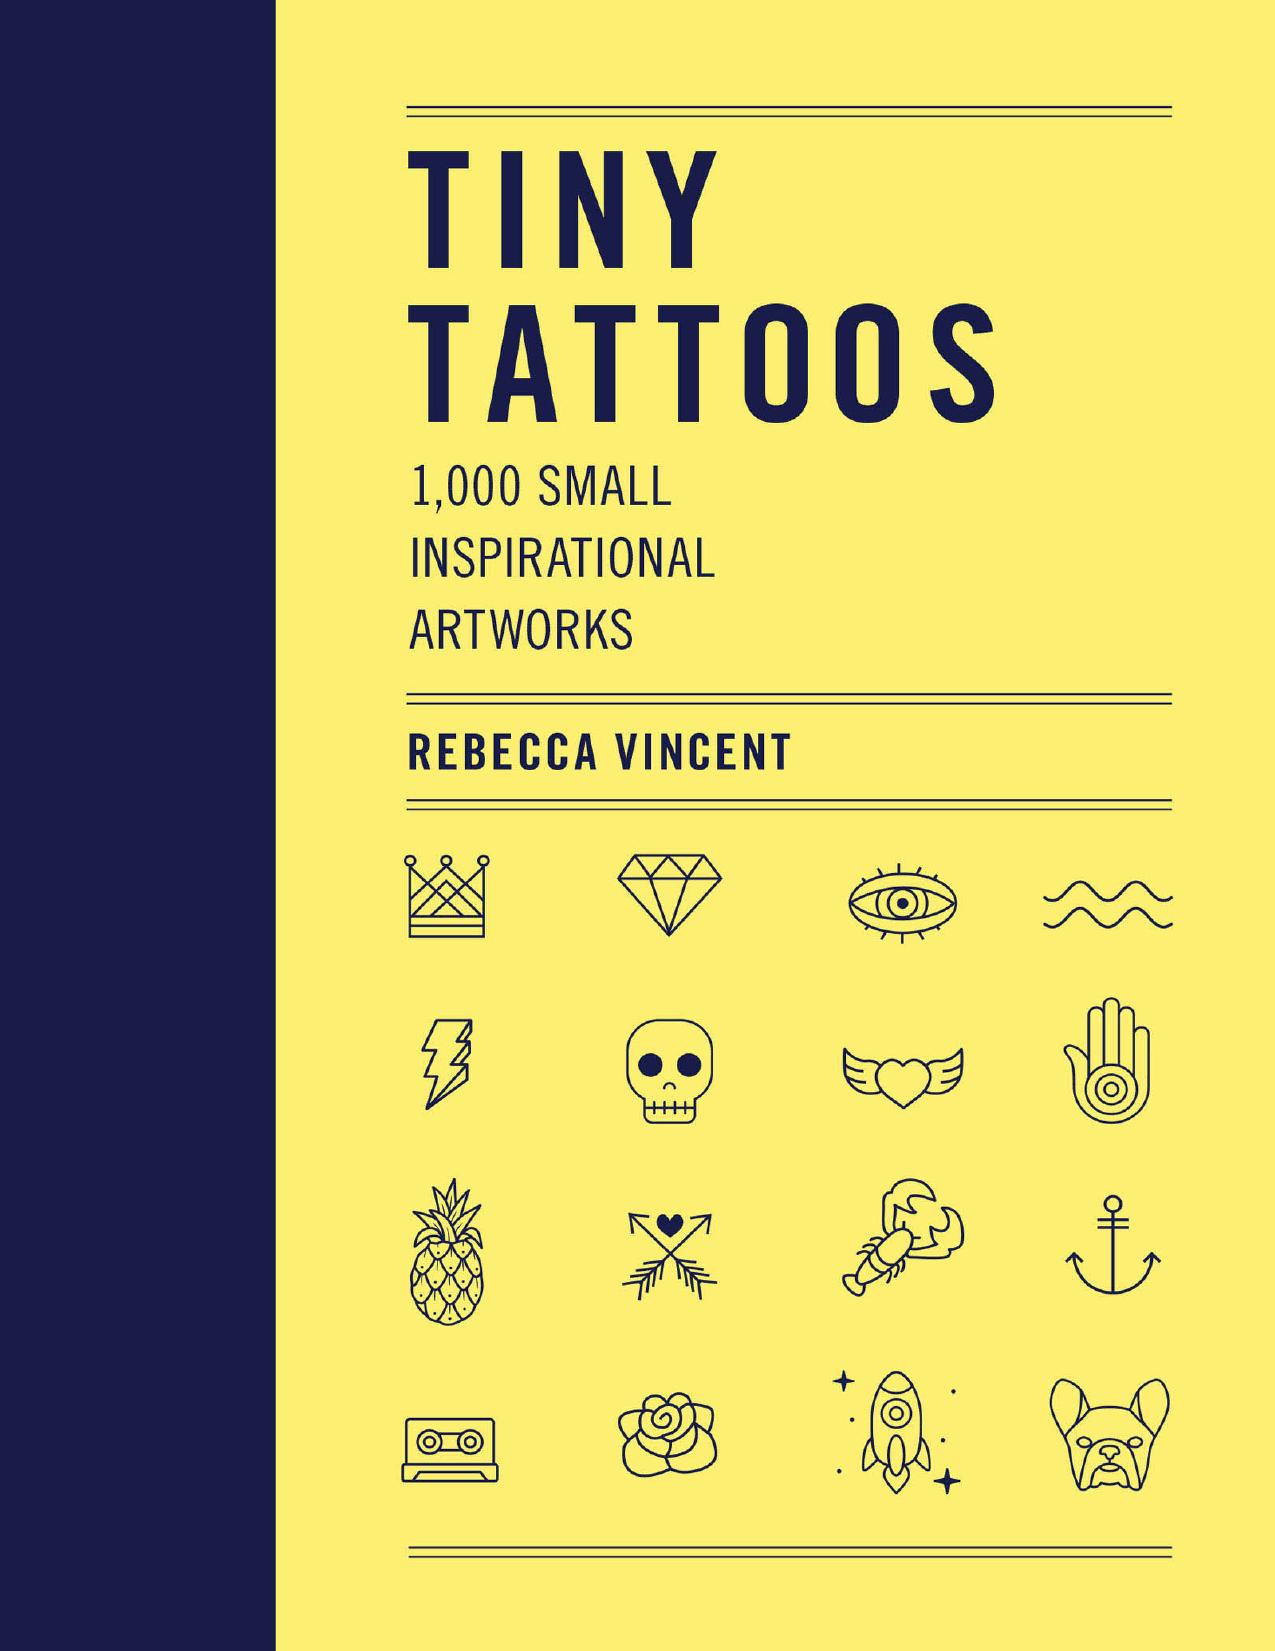 Tiny Tattoos by Rebecca Vincent